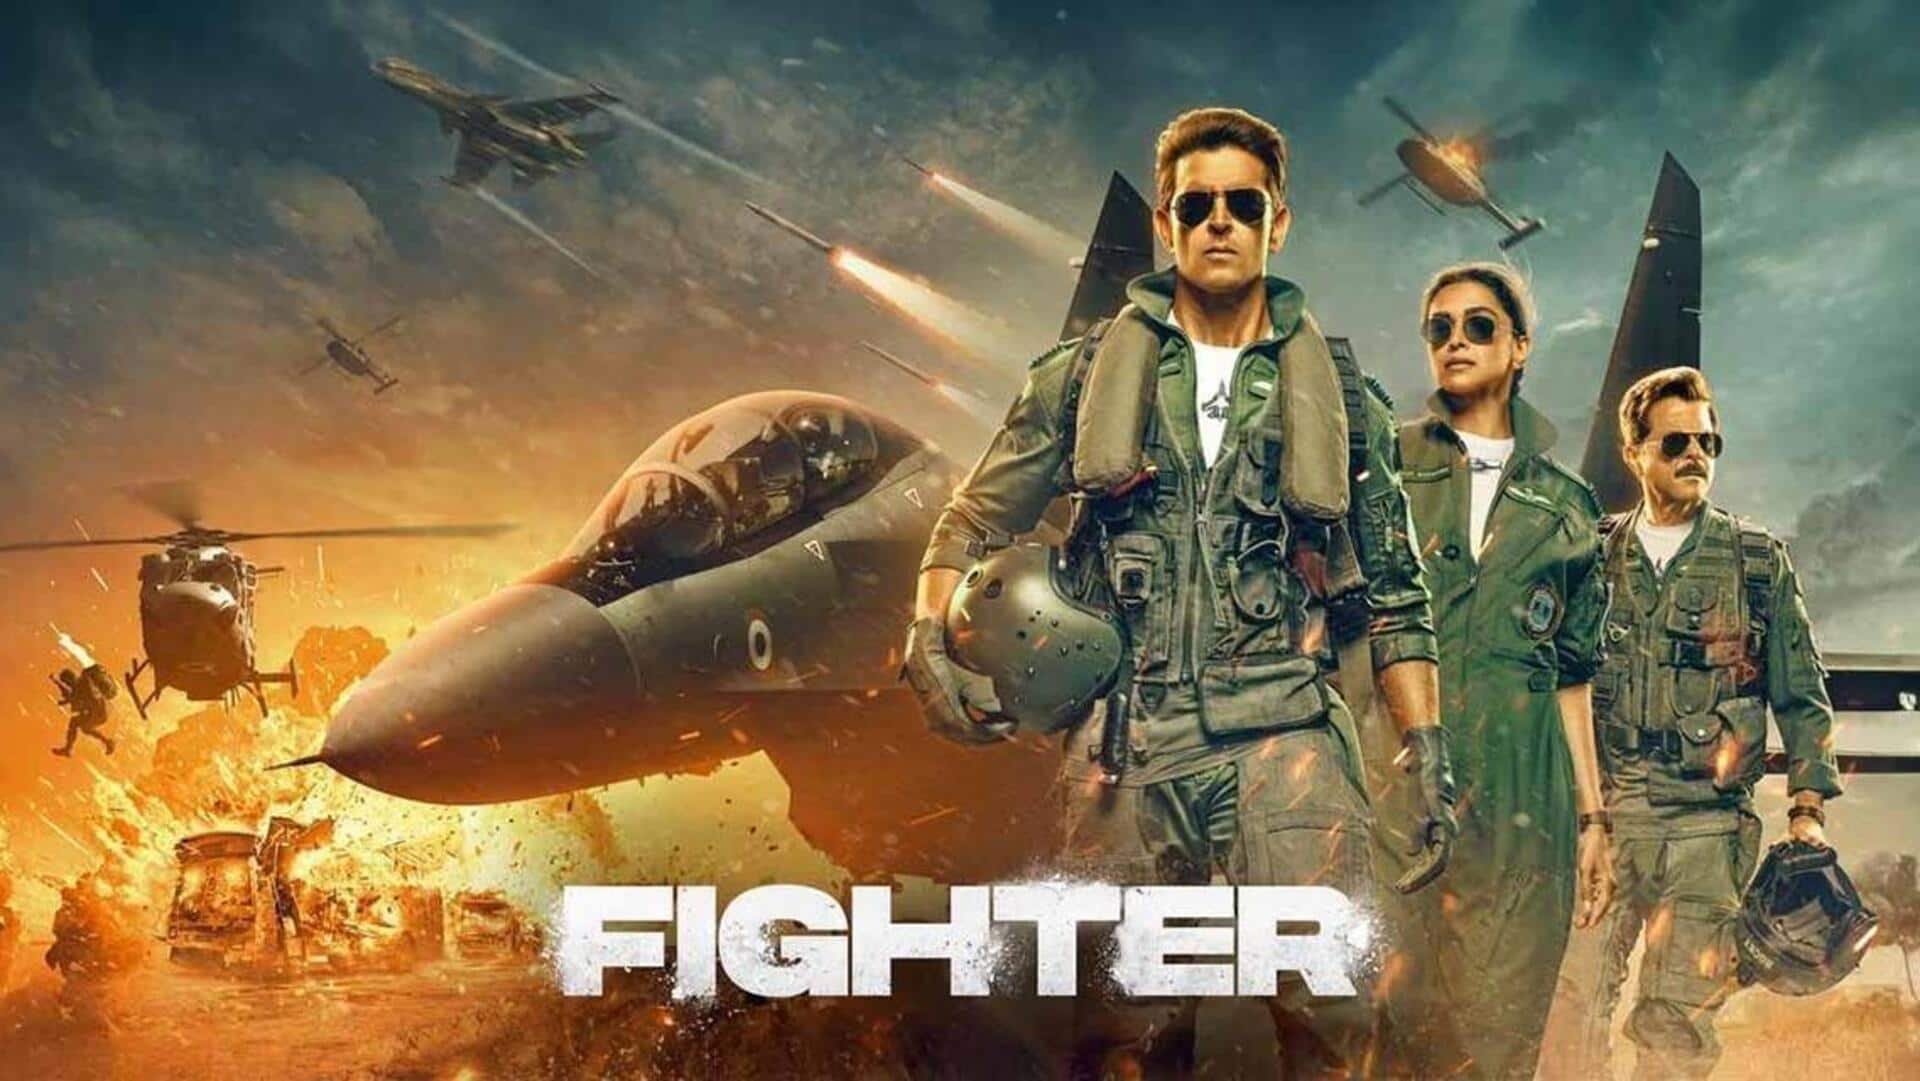 Box office collection: 'Fighter' aims to accelerate on weekend